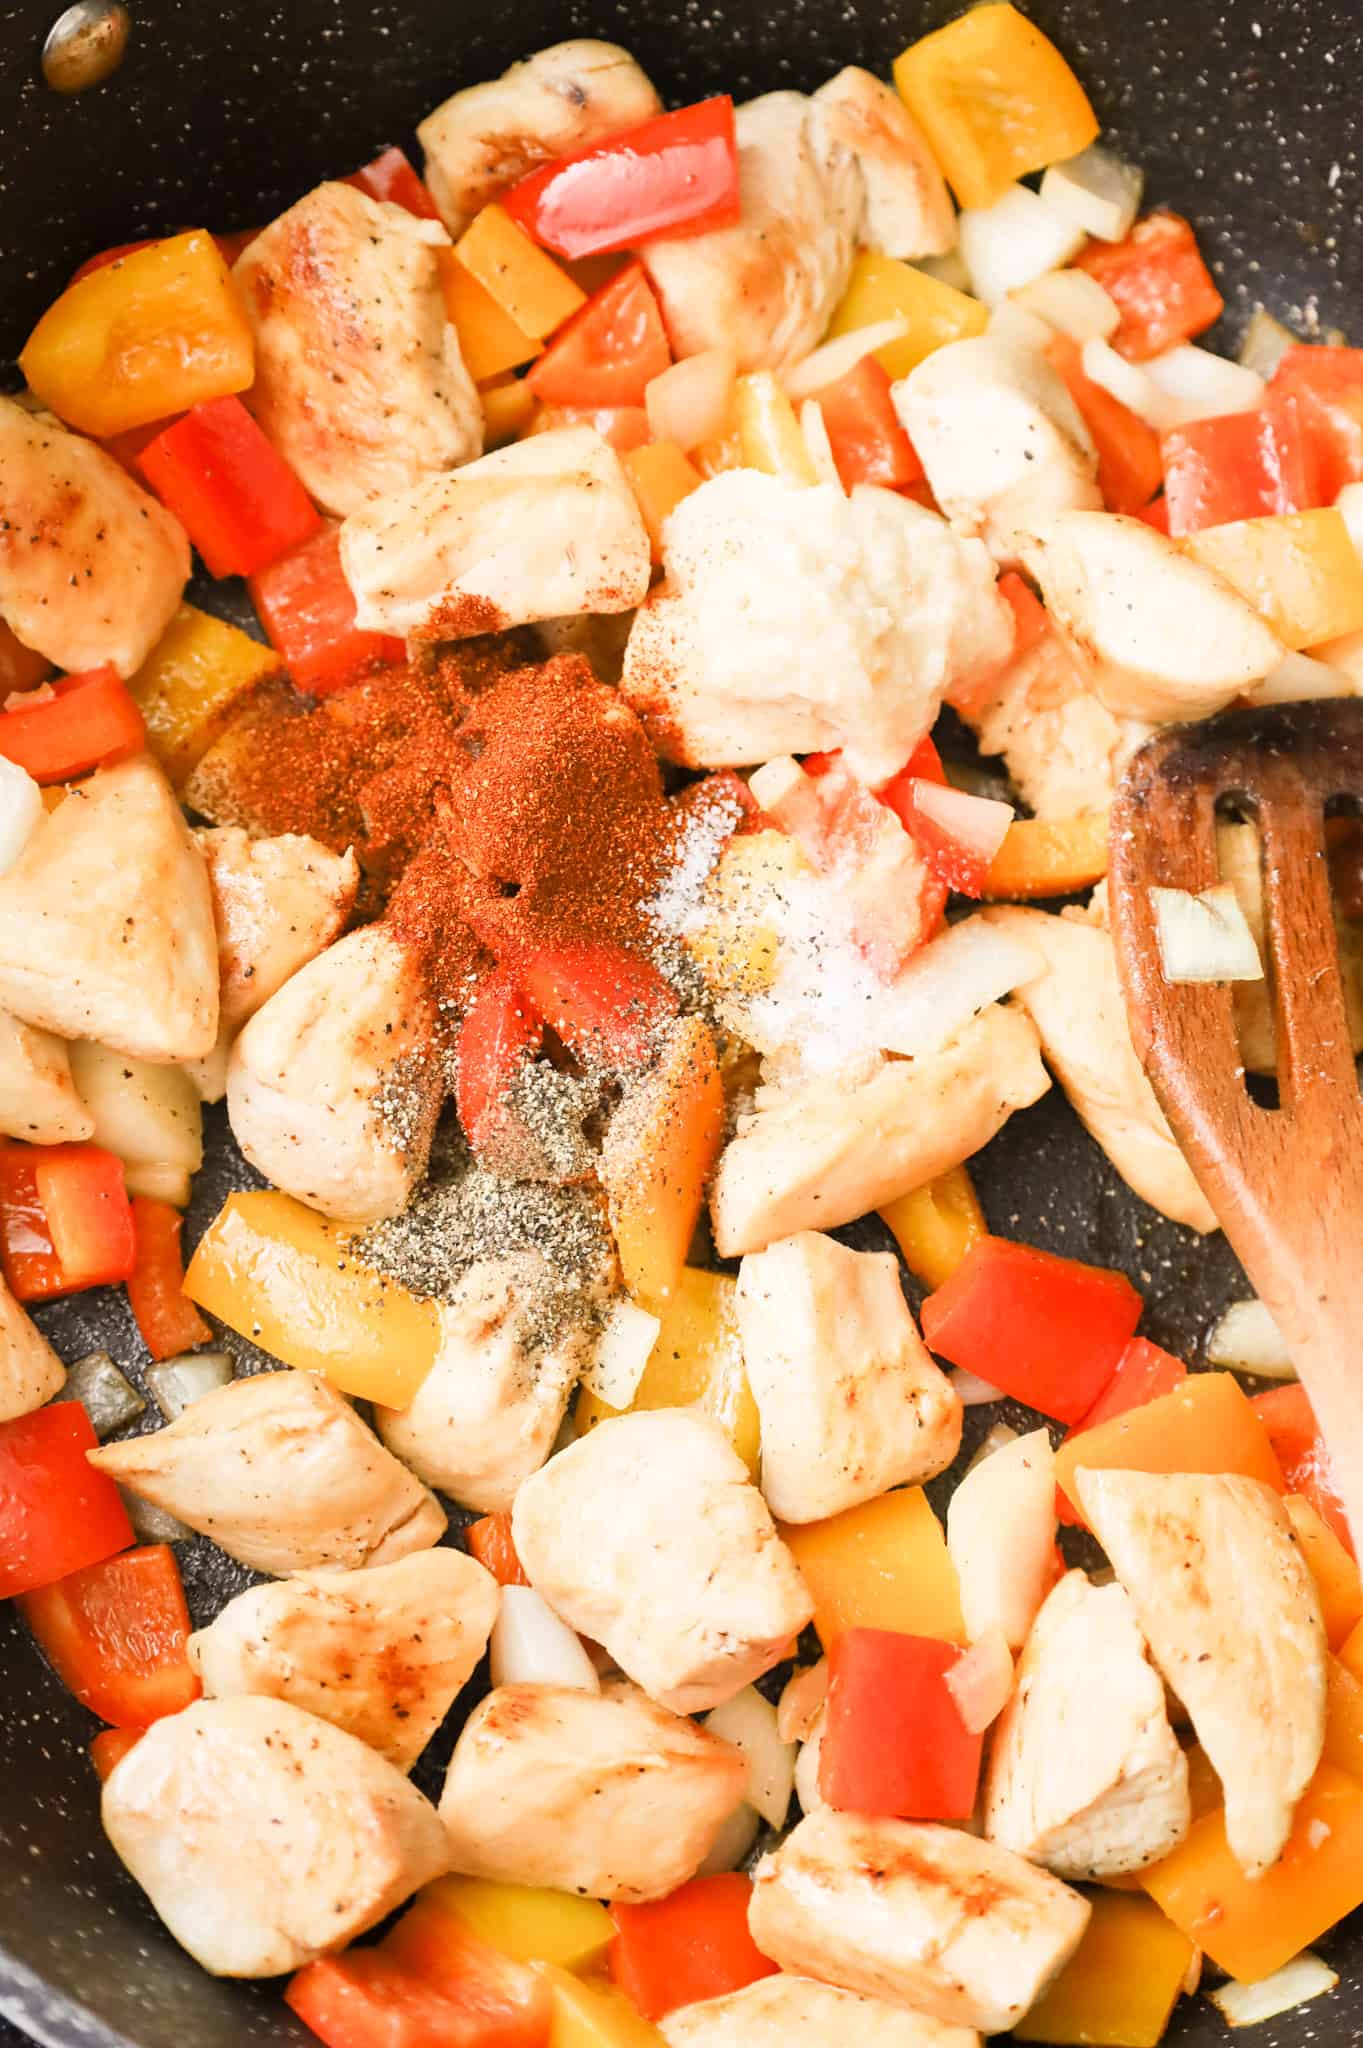 garlic puree, paprika, salt and pepper added to diced peppers and chicken breast chunks in a skillet